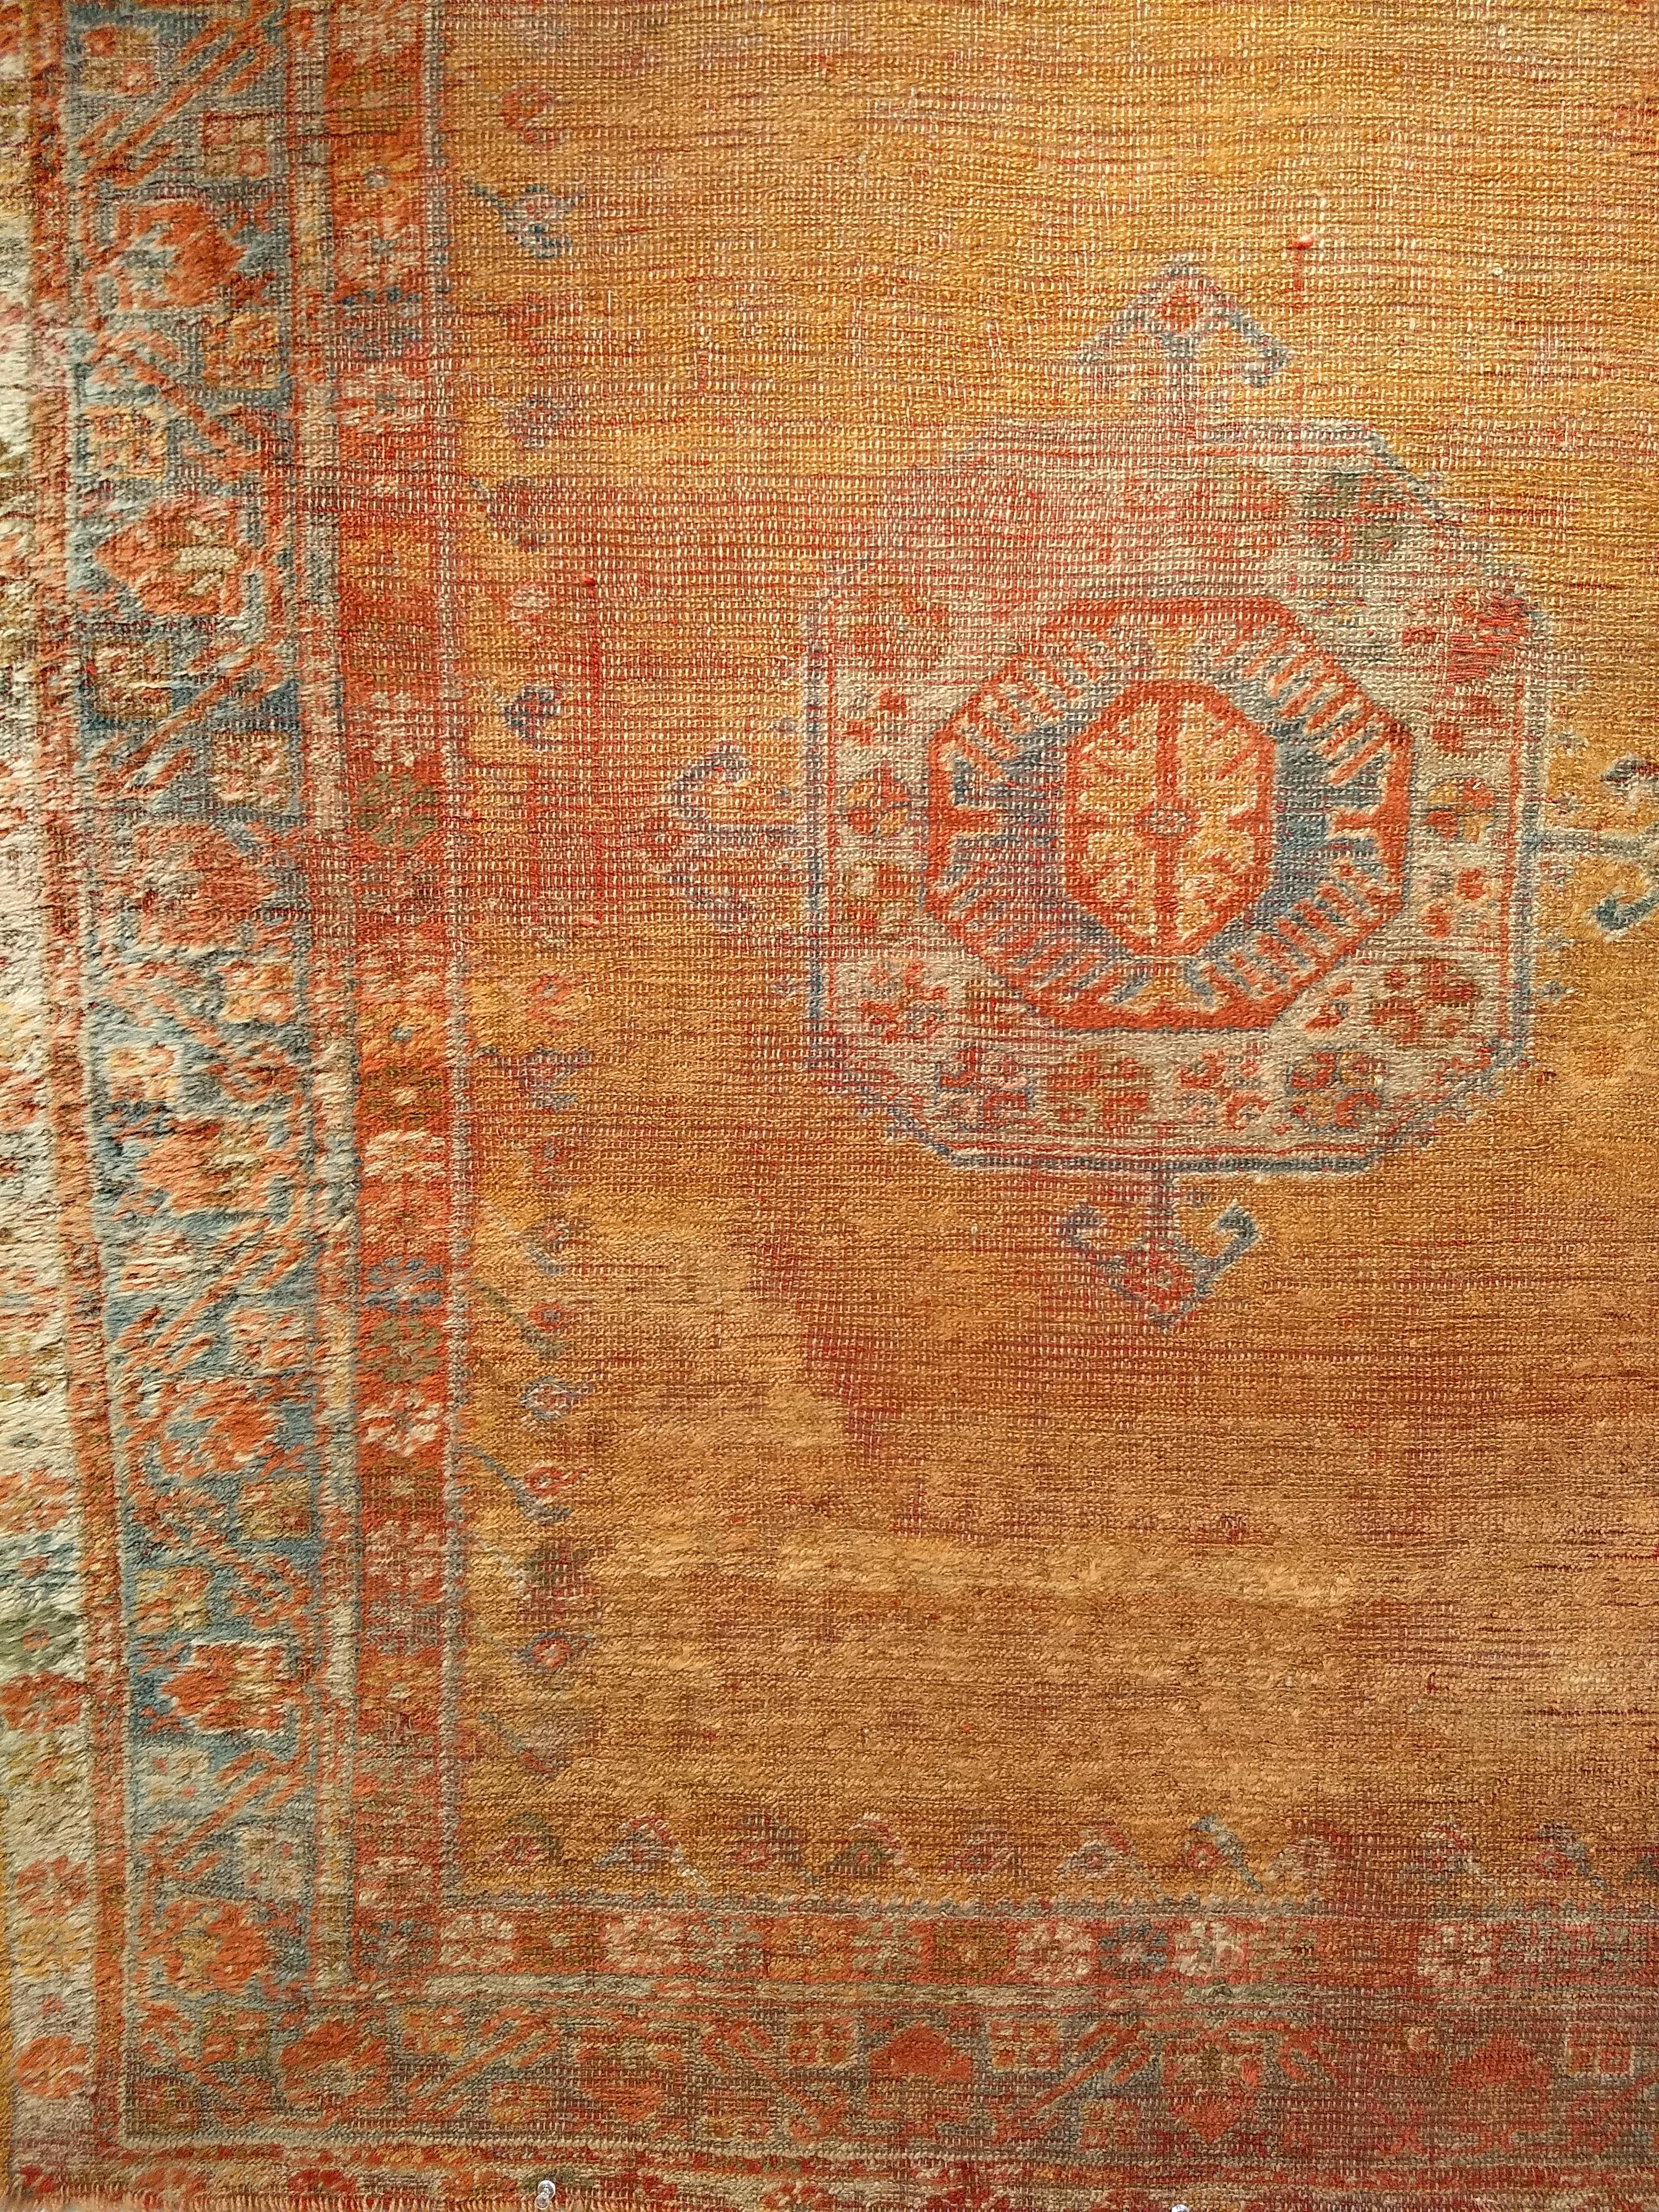 Vegetable Dyed Late 19th Century Turkish Oushak Area Rug in Mamluk Pattern in Saffron, Teal For Sale